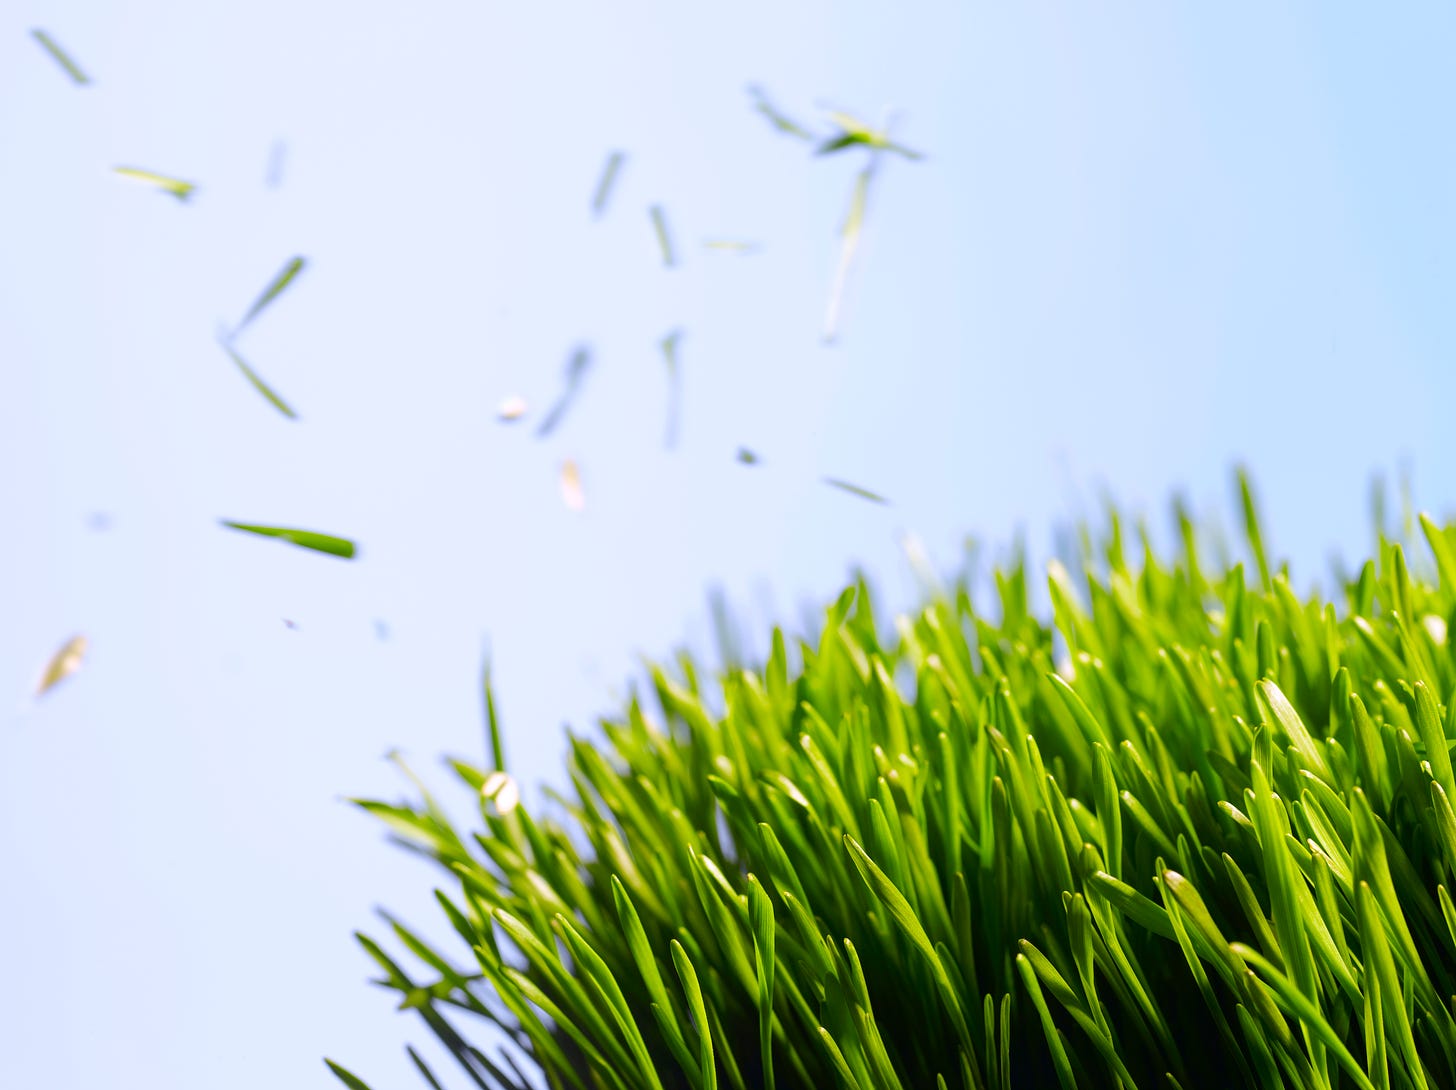 Blades of freshly cut  grass flying off a tuft of uncut grass